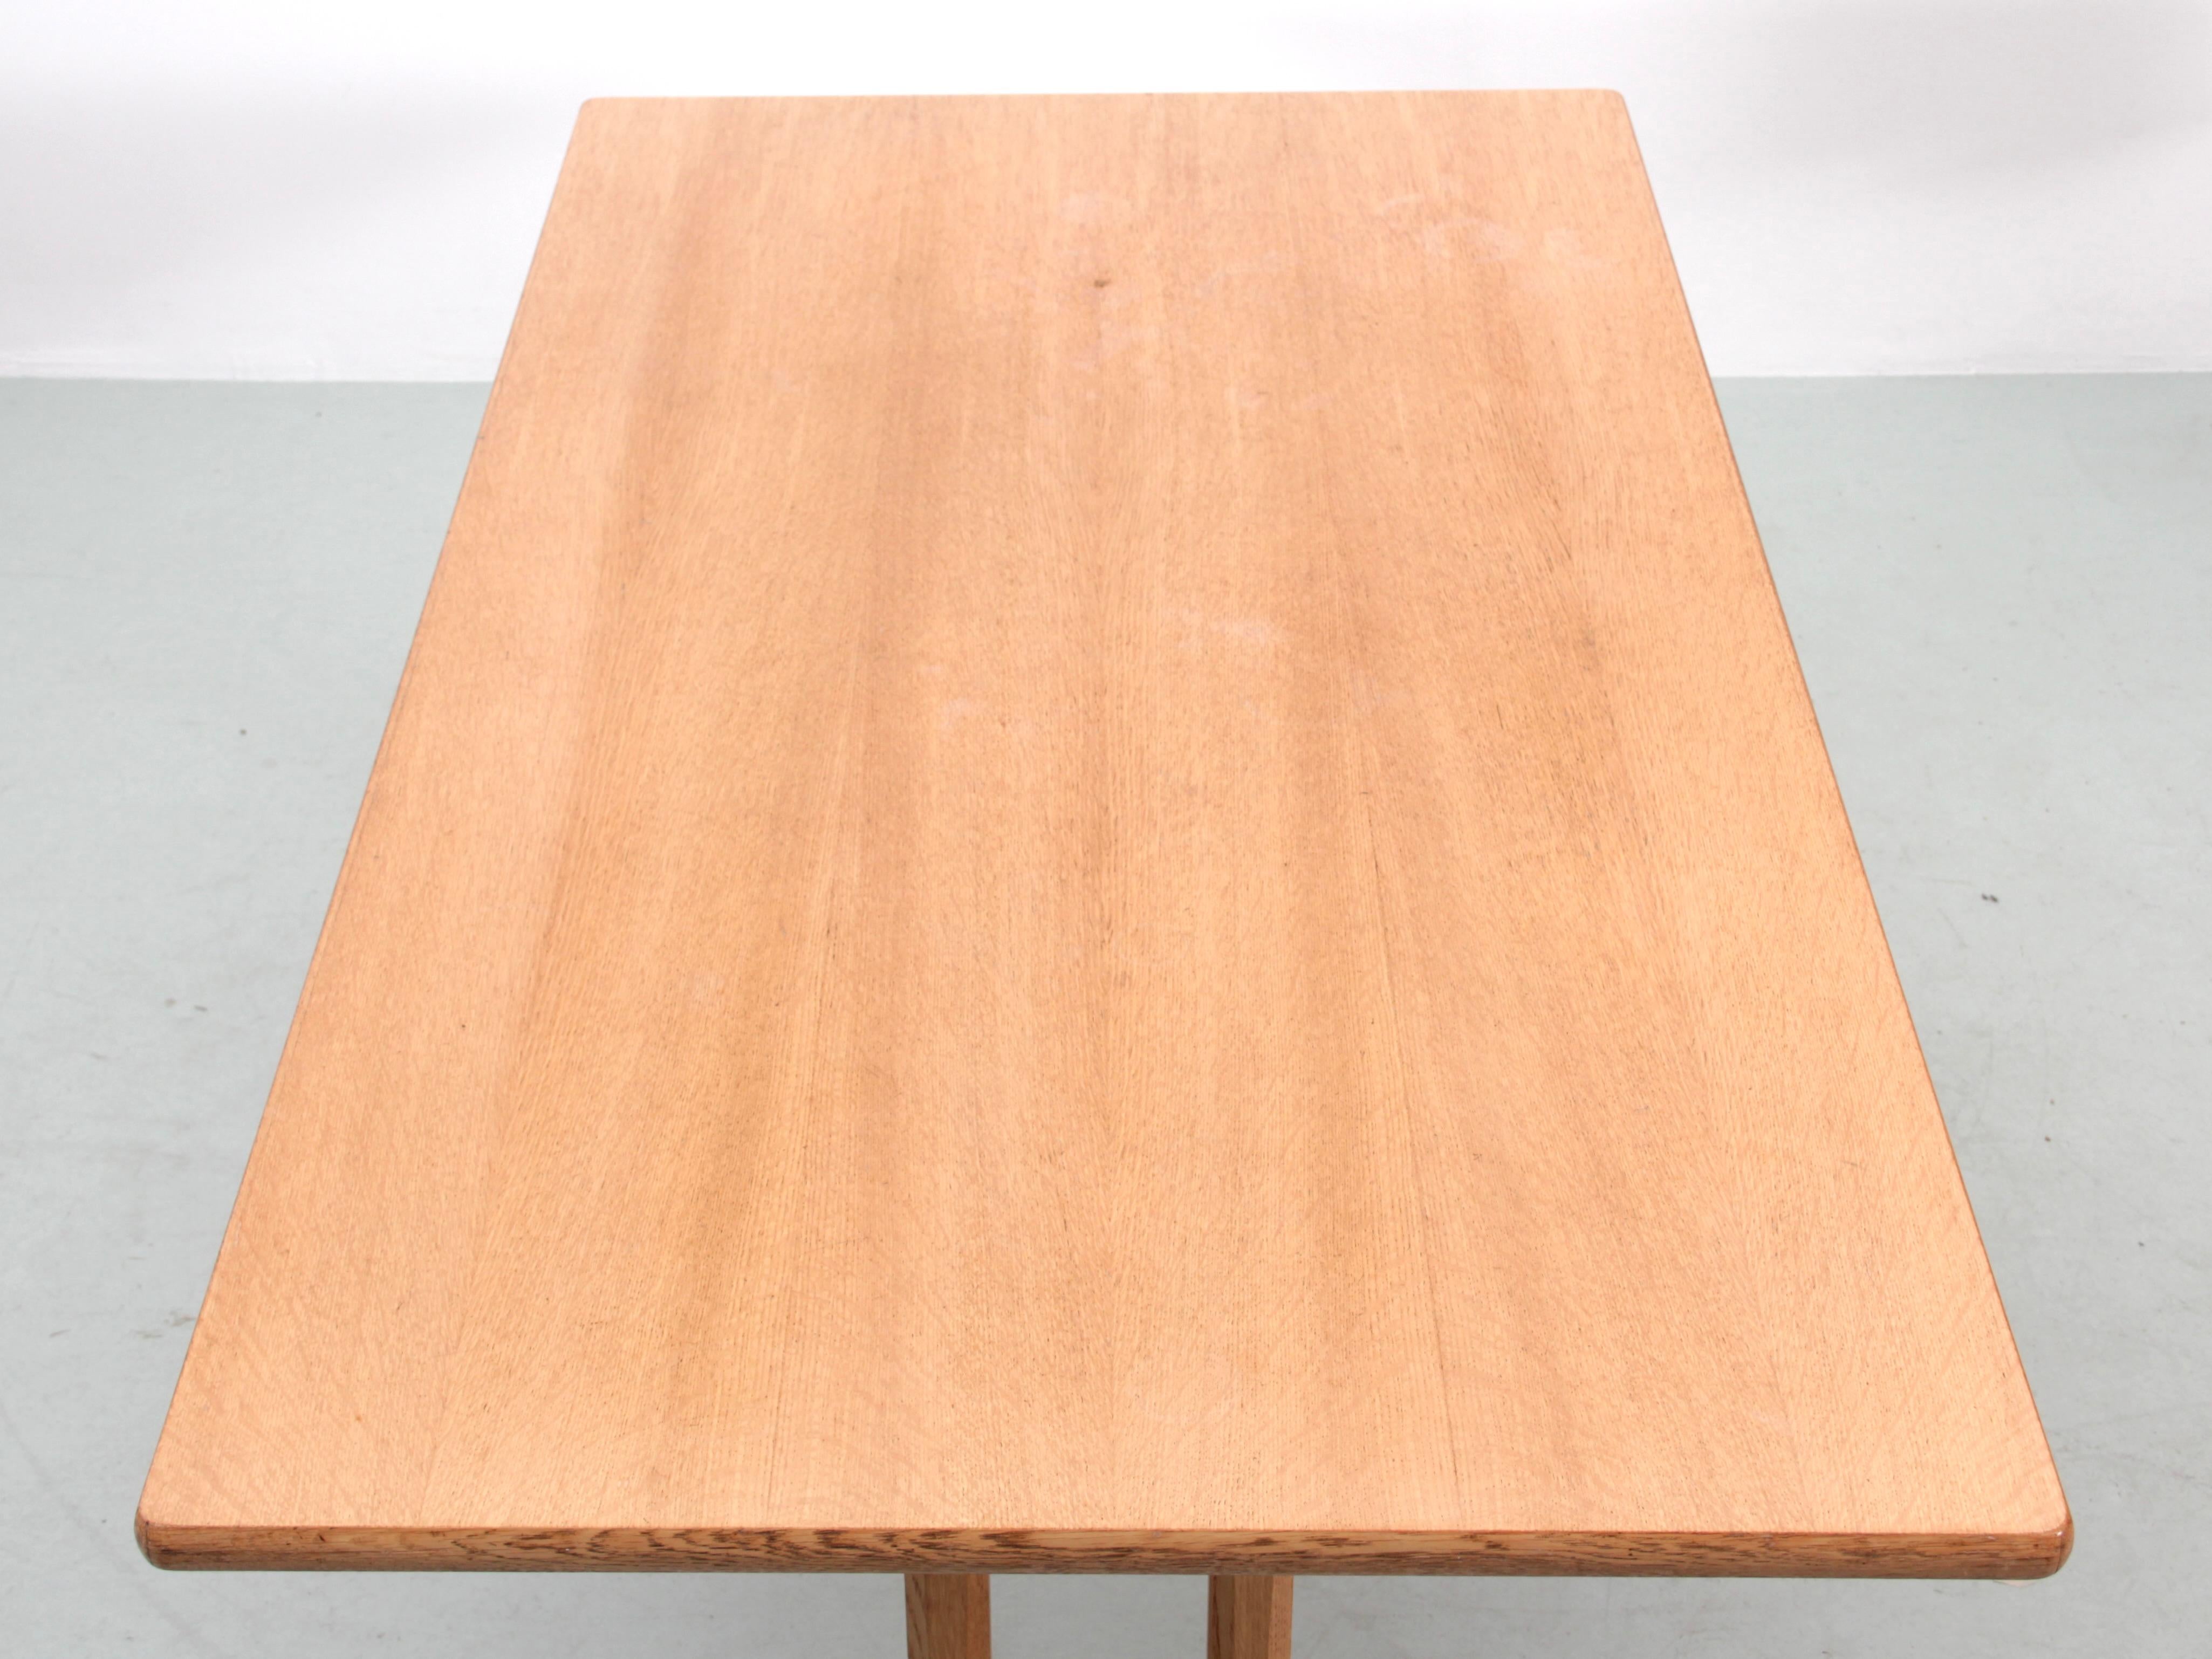 Mid modern Scandinavian oak dining table model Shaker C18 by Borge Mogensen for FDB Møbler. Original model, some traces on the board. The top could be completely restored if necessary, on request. Consult us

The oak dining table model C18 was